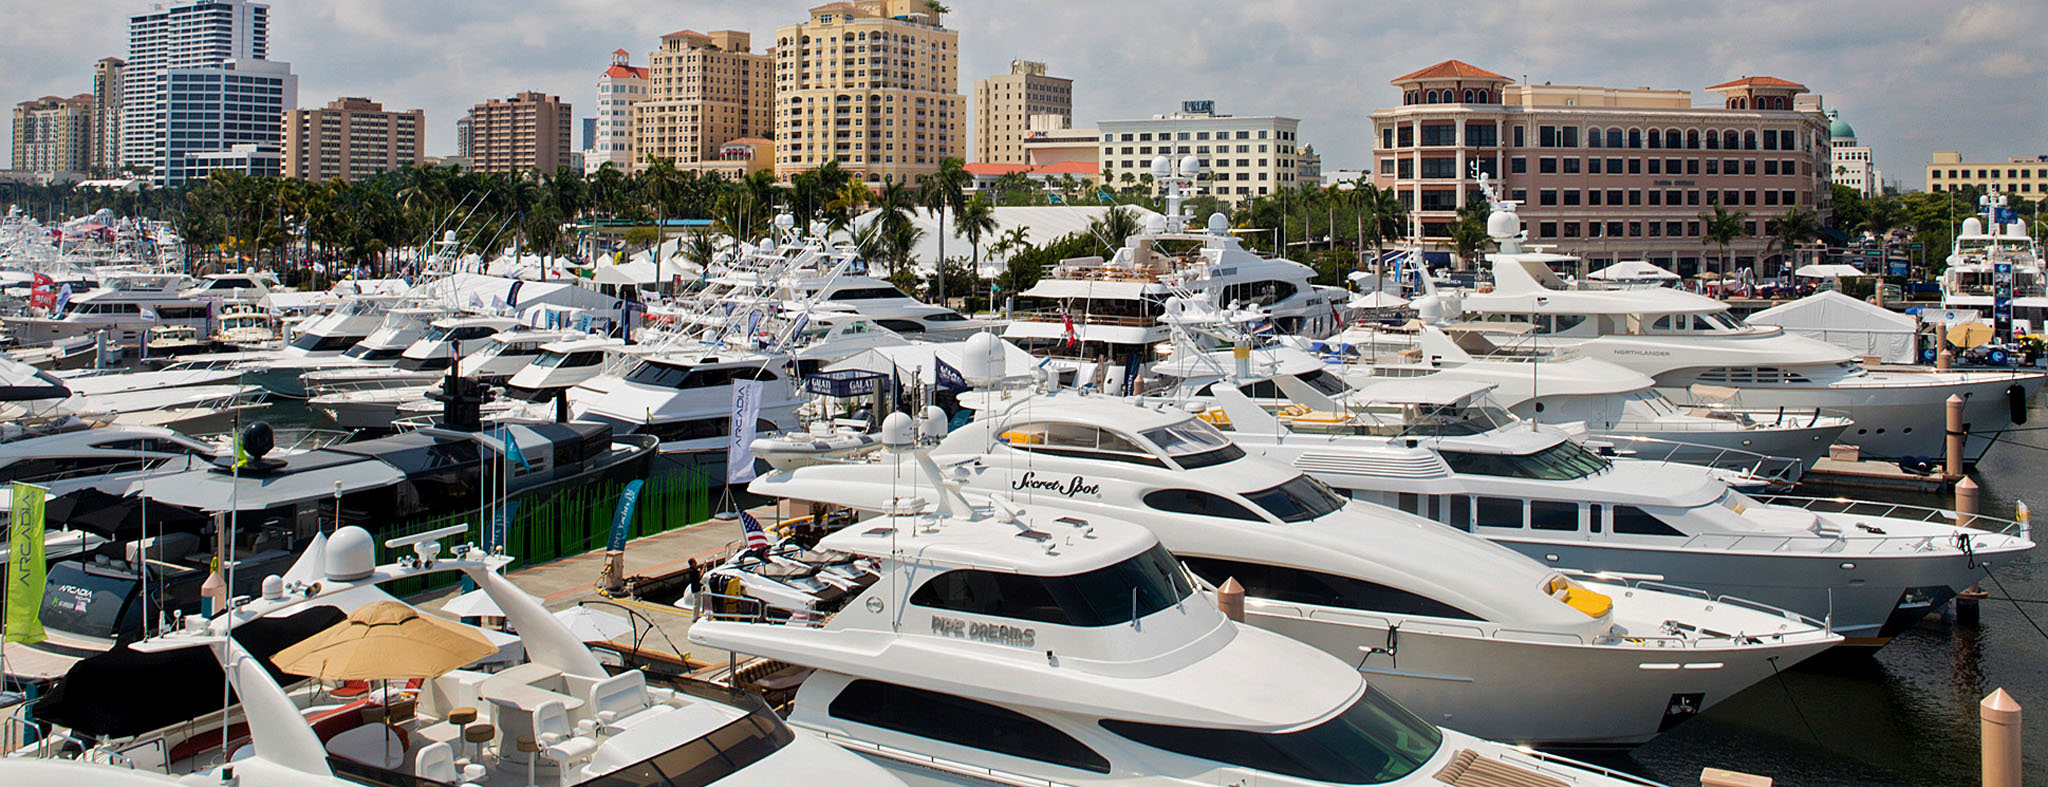 A view of the docks during the Palm Beach International Boat Show on March 26, 2015 in downtown West Palm Beach.  (Brianna Soukup / Palm Beach Post)